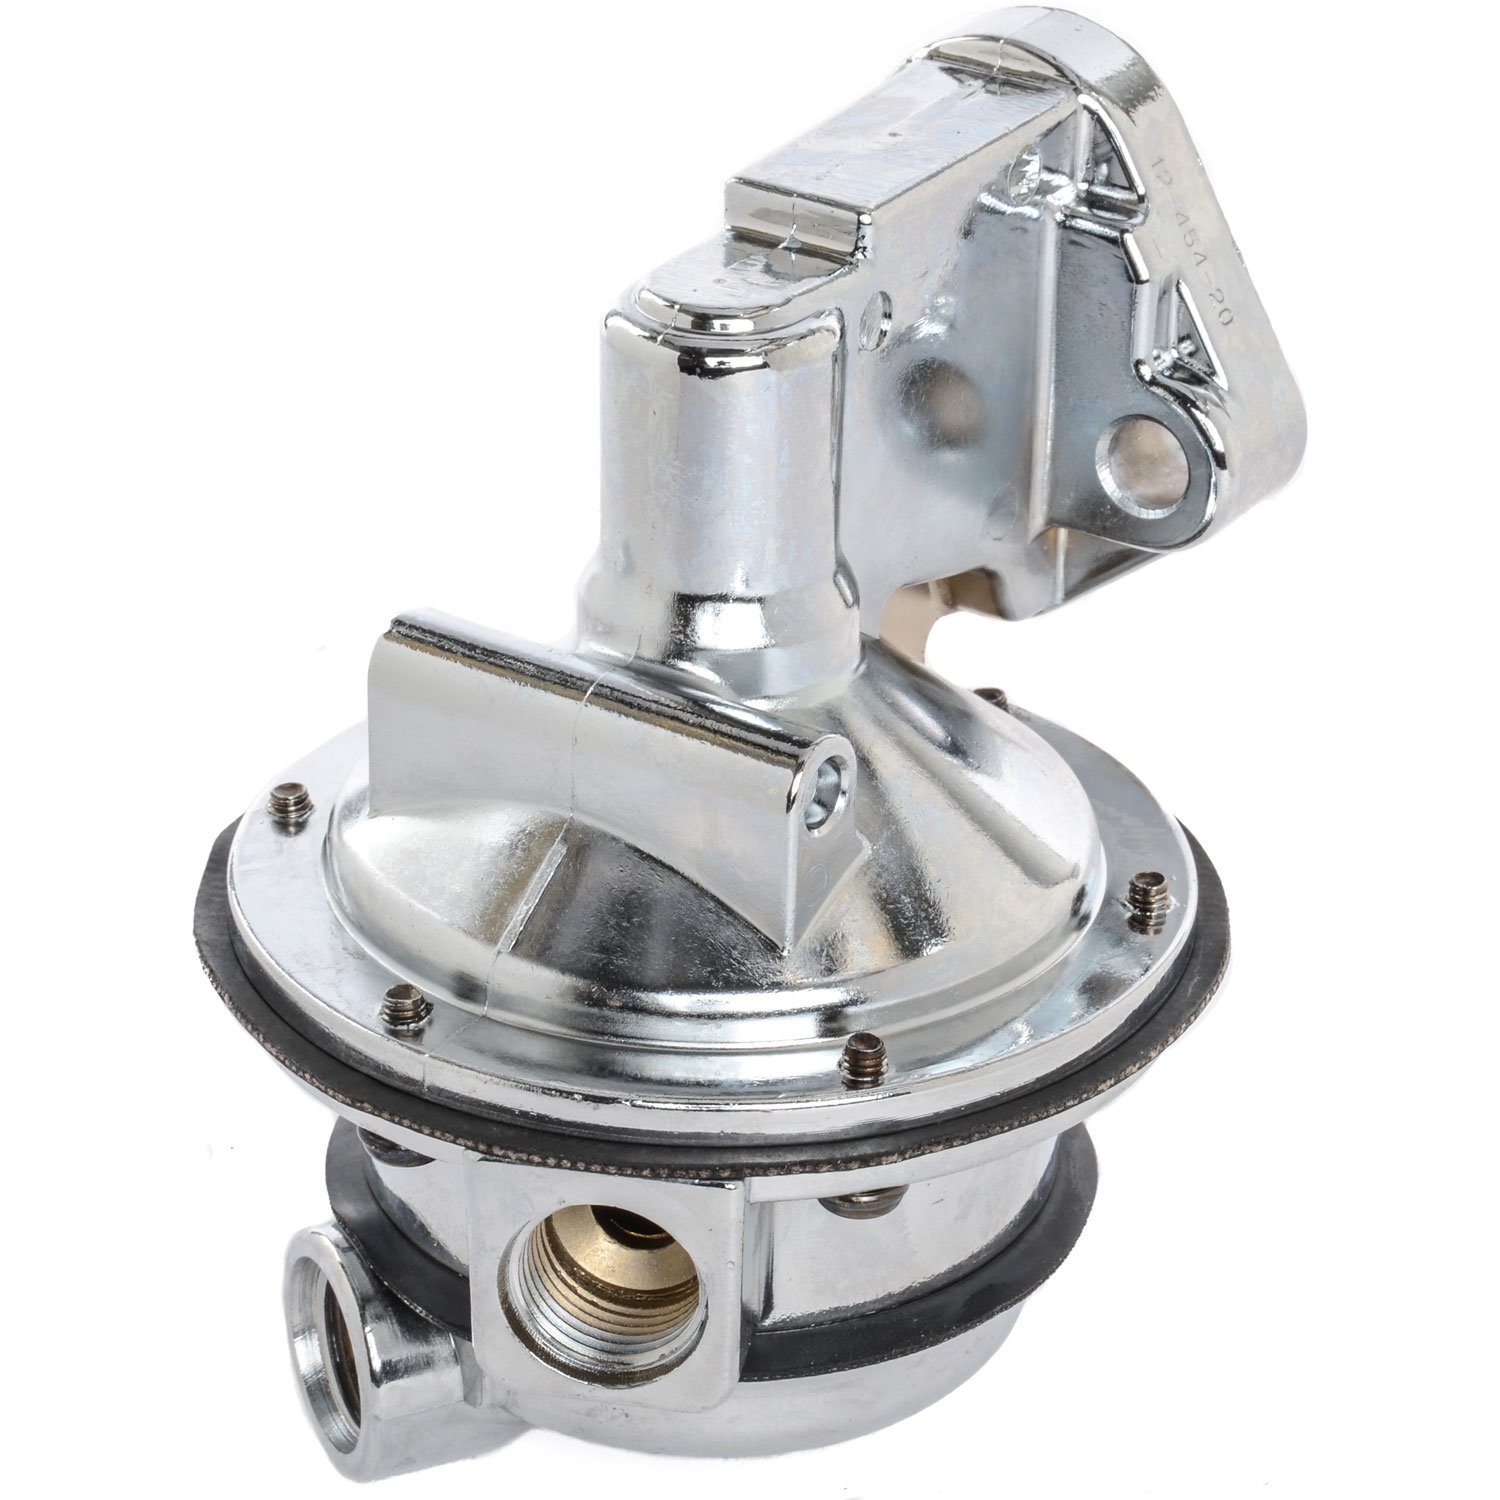 JEGS Performance Products 15966: High-Flow Mechanical Fuel Pump Big Block  Chevy 396-427-454 [170 gph, Chrome] - JEGS